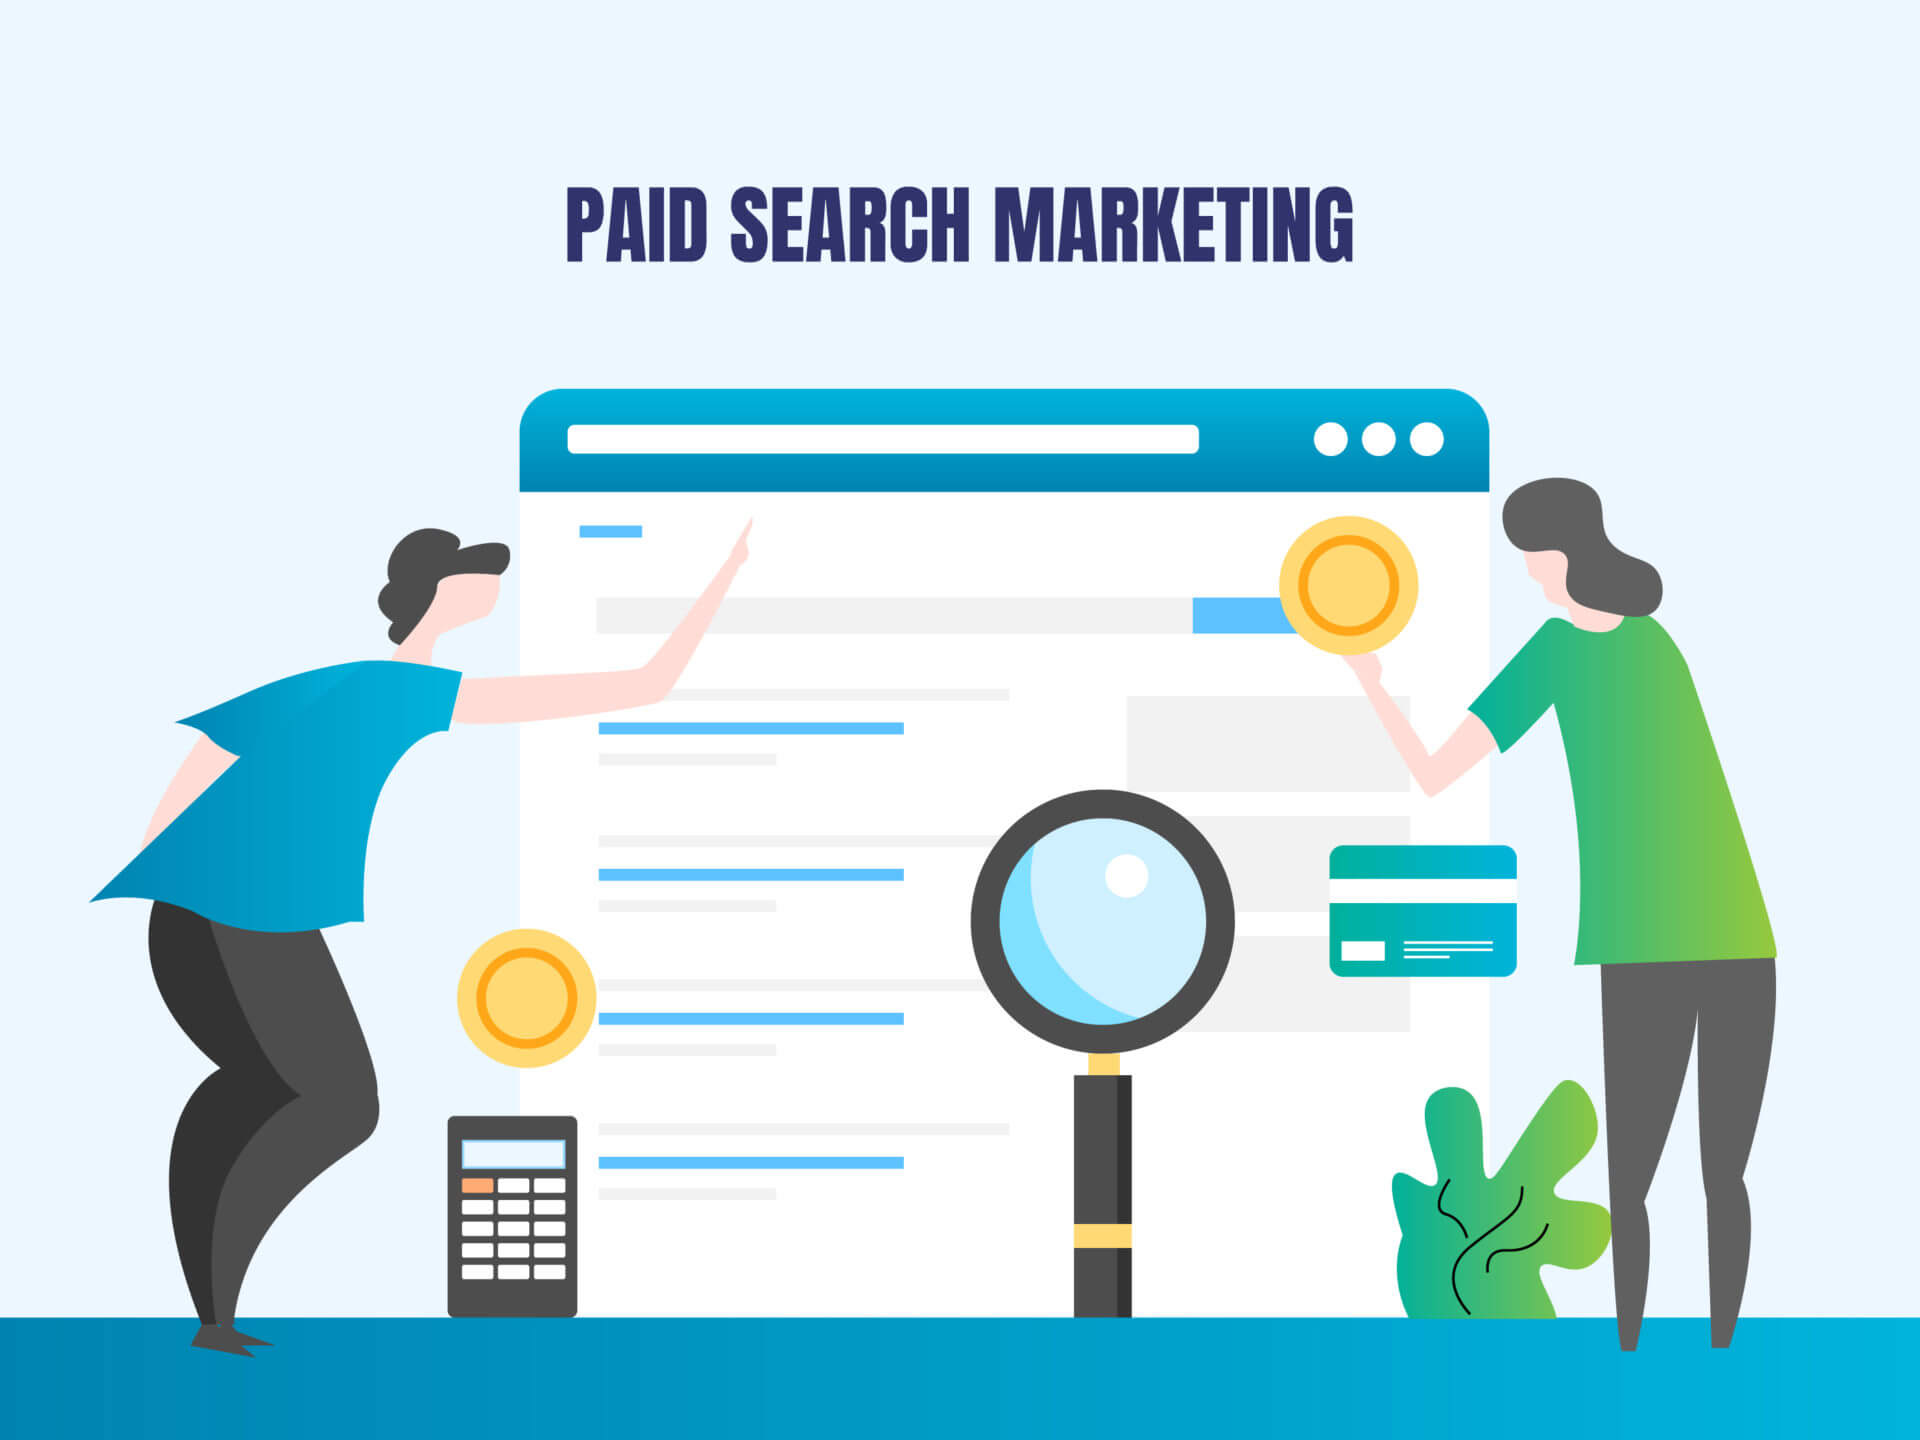 5. Structuring paid search campaigns.jpg